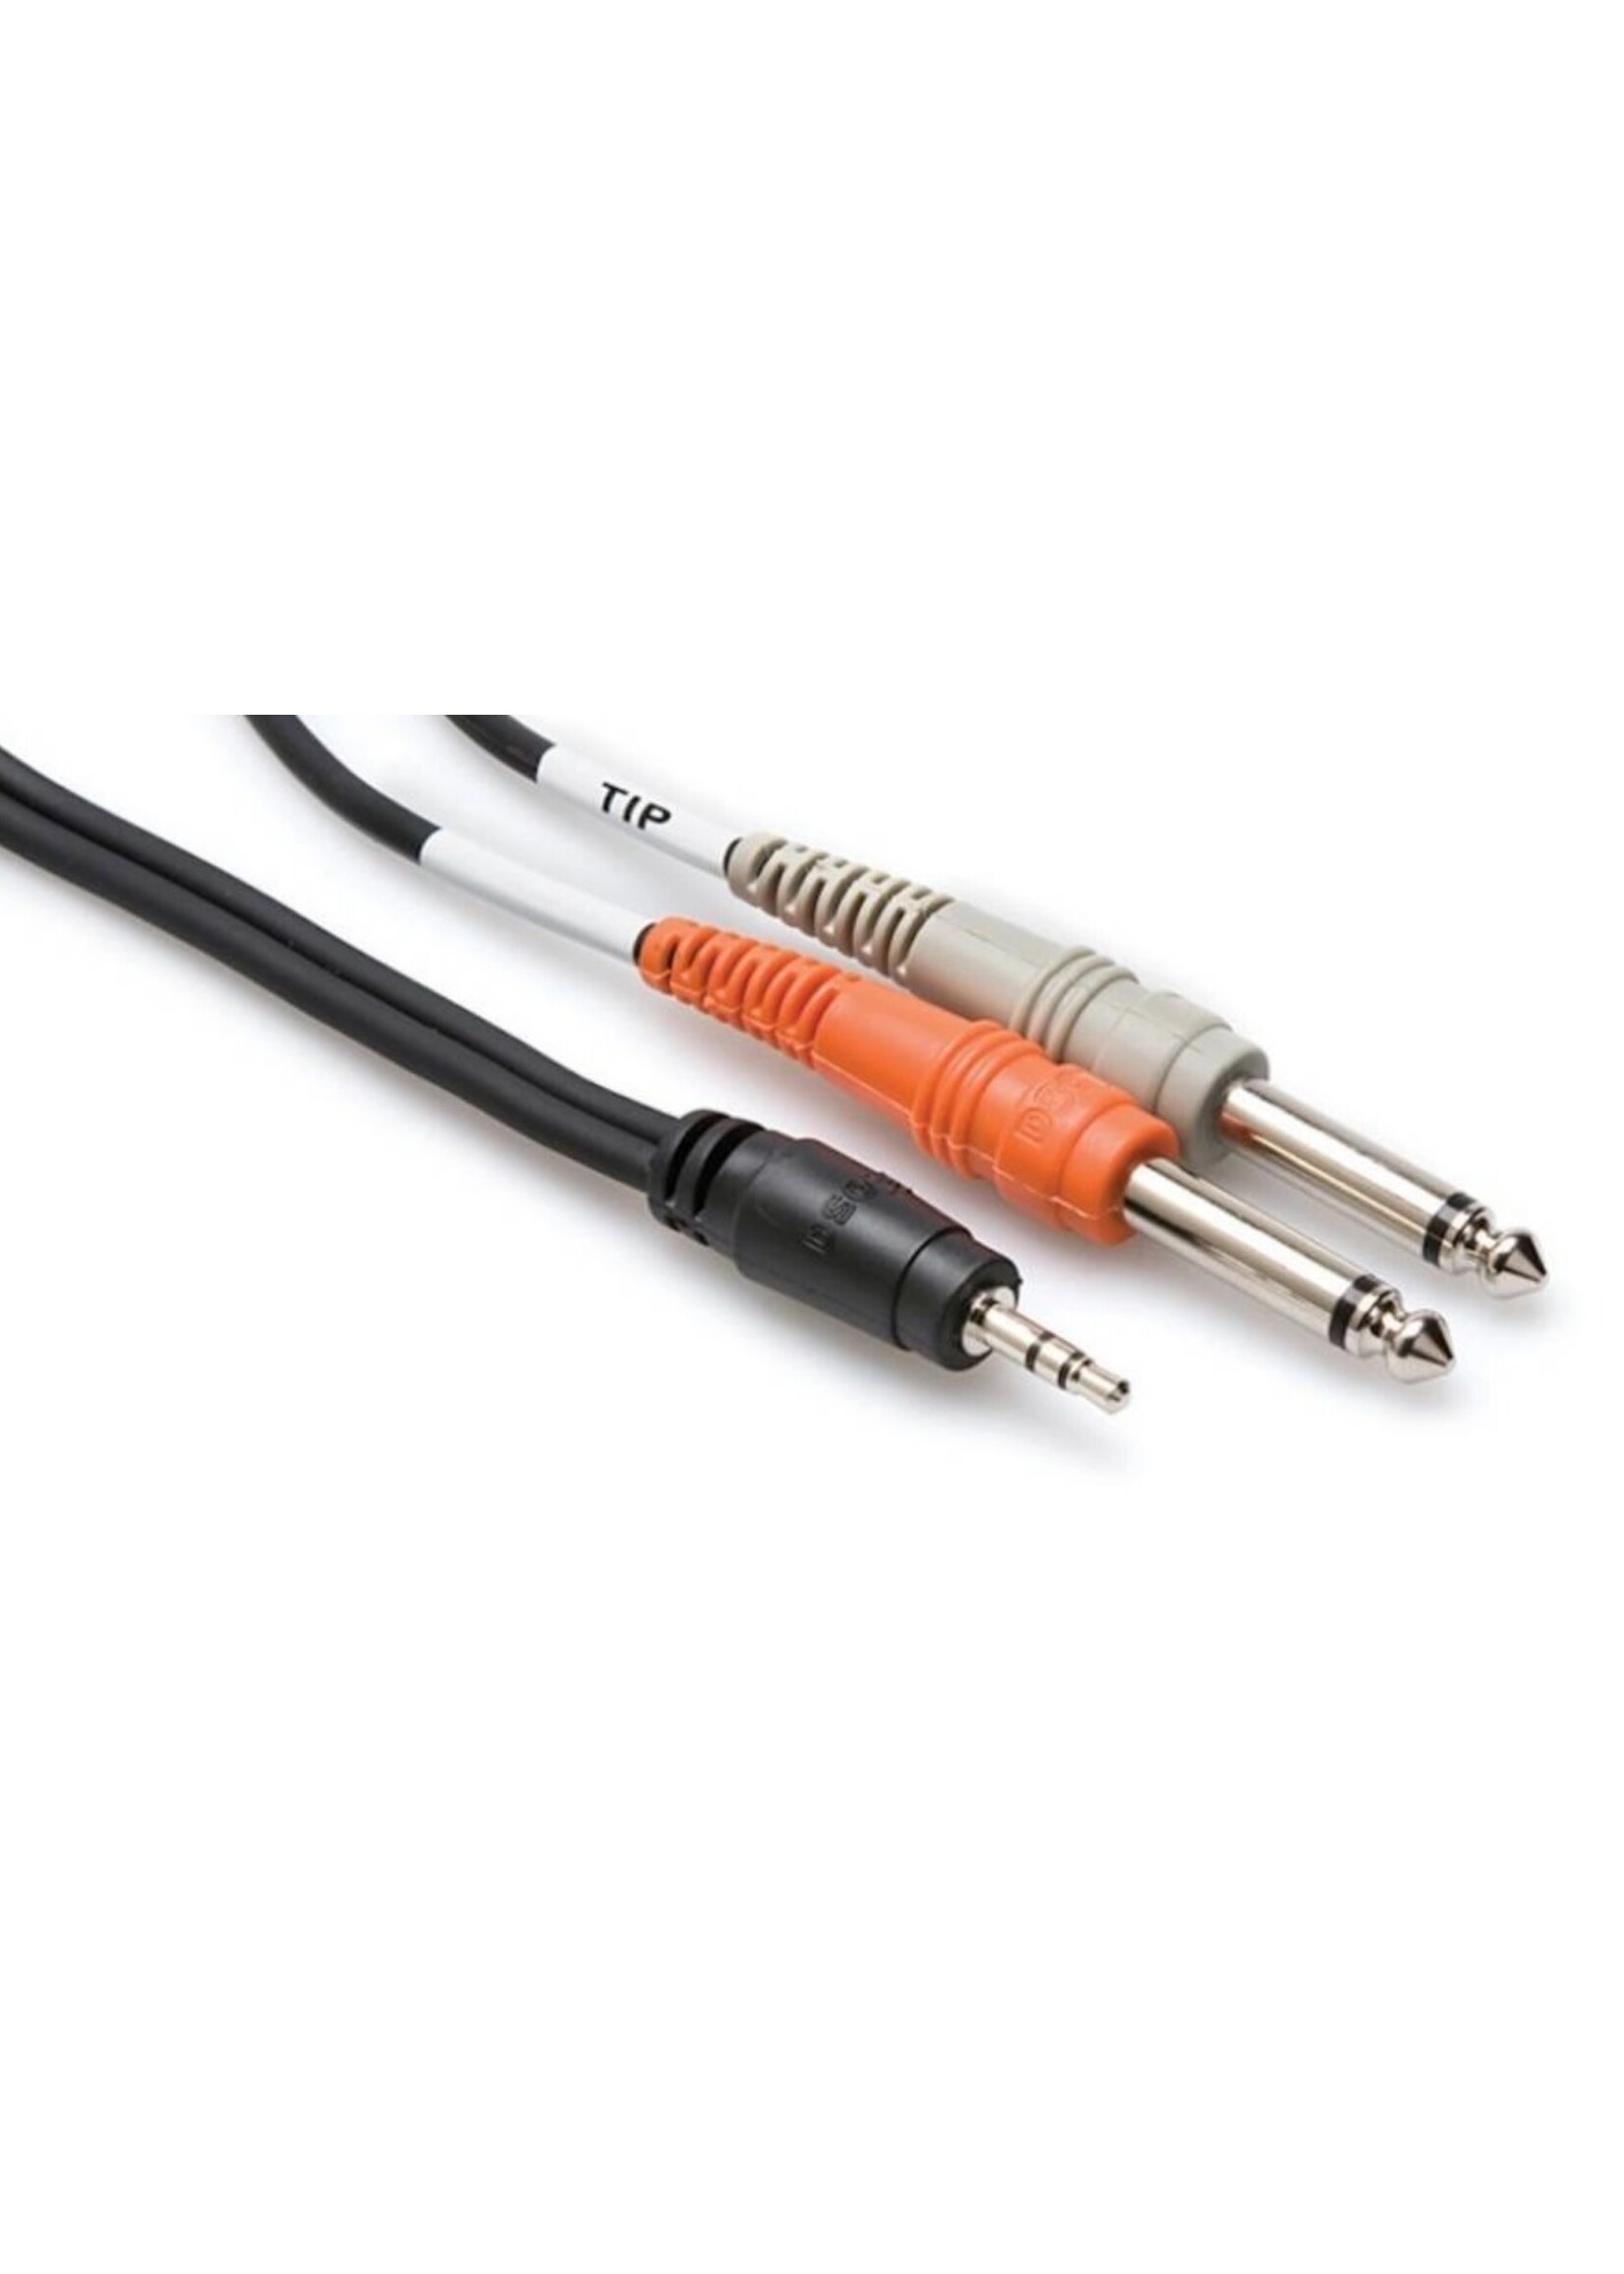 Hosa Stereo Breakout 3.5mm (M) TRS to Dual 1/4'' TS - 3 foot |   Model: # CMP-153